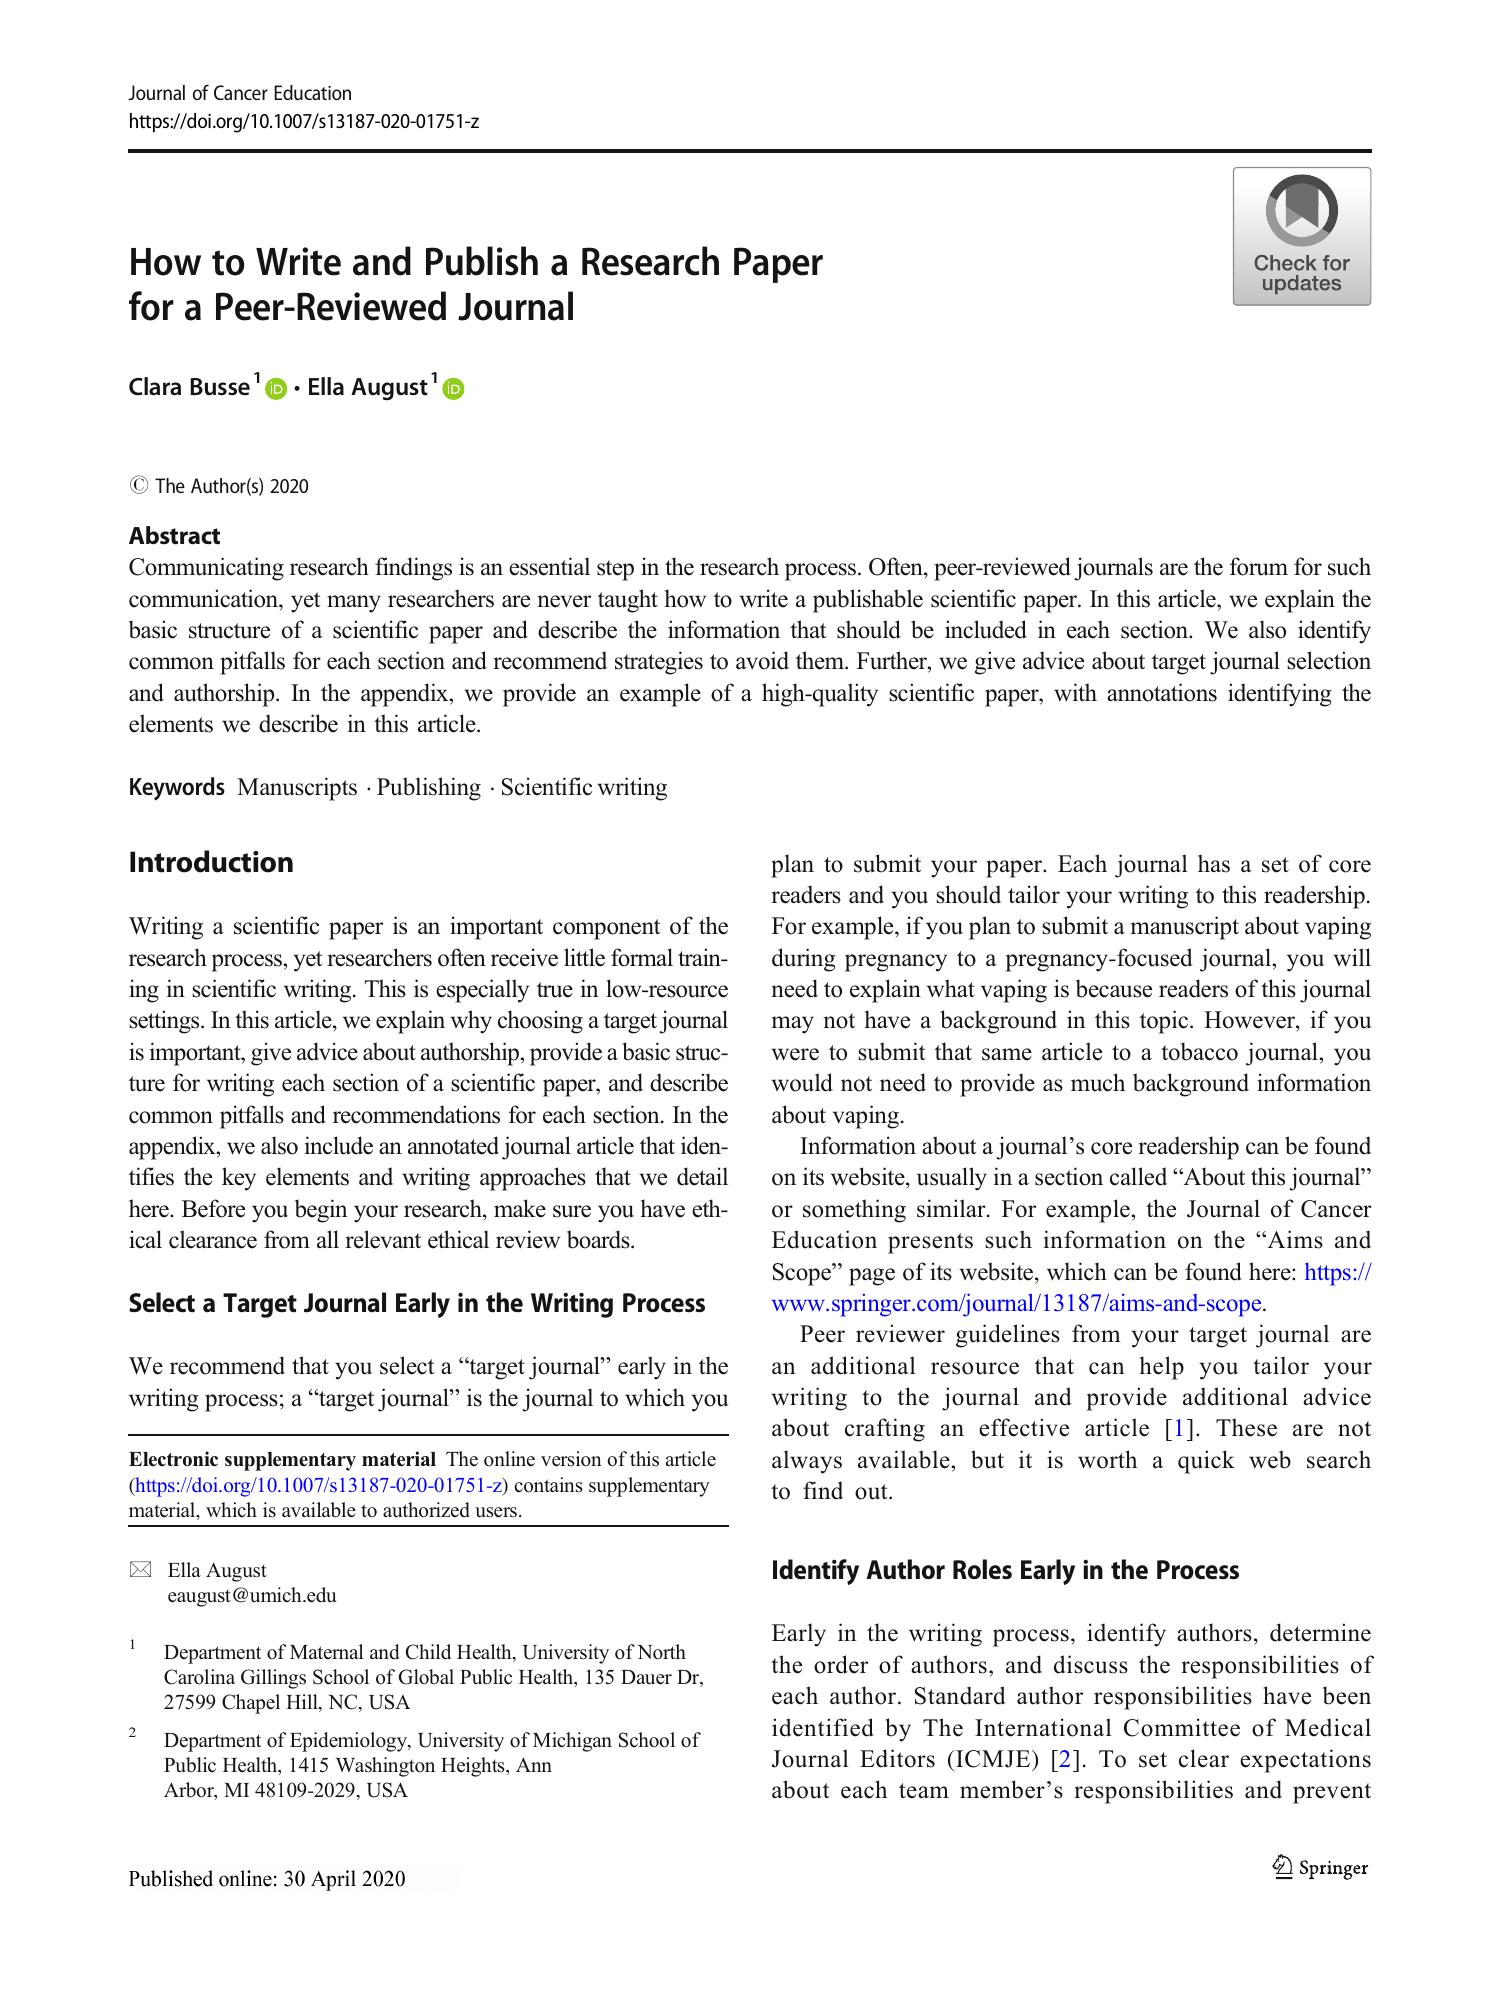 how to publish a research paper in elsevier journal